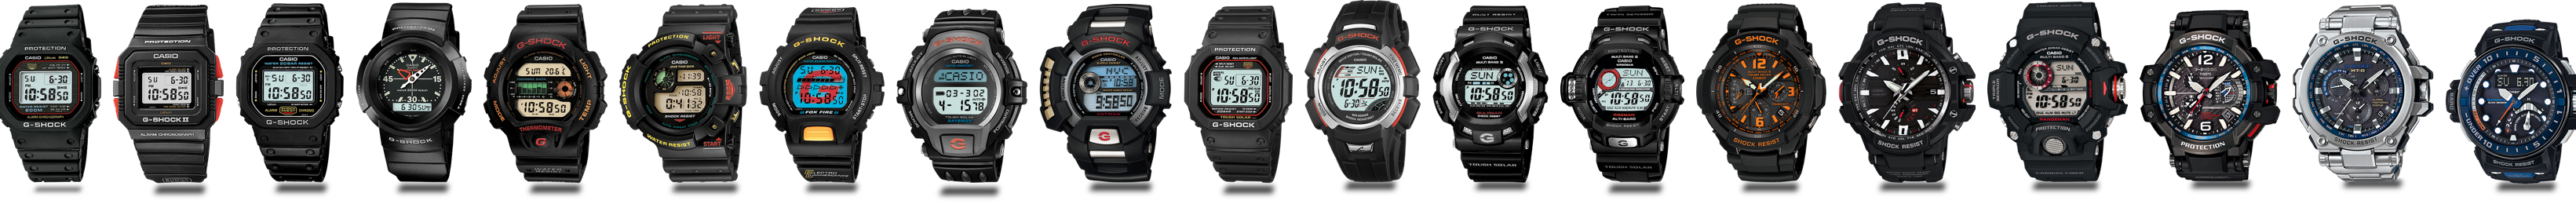 An evoltion of the G-SHOCK watch